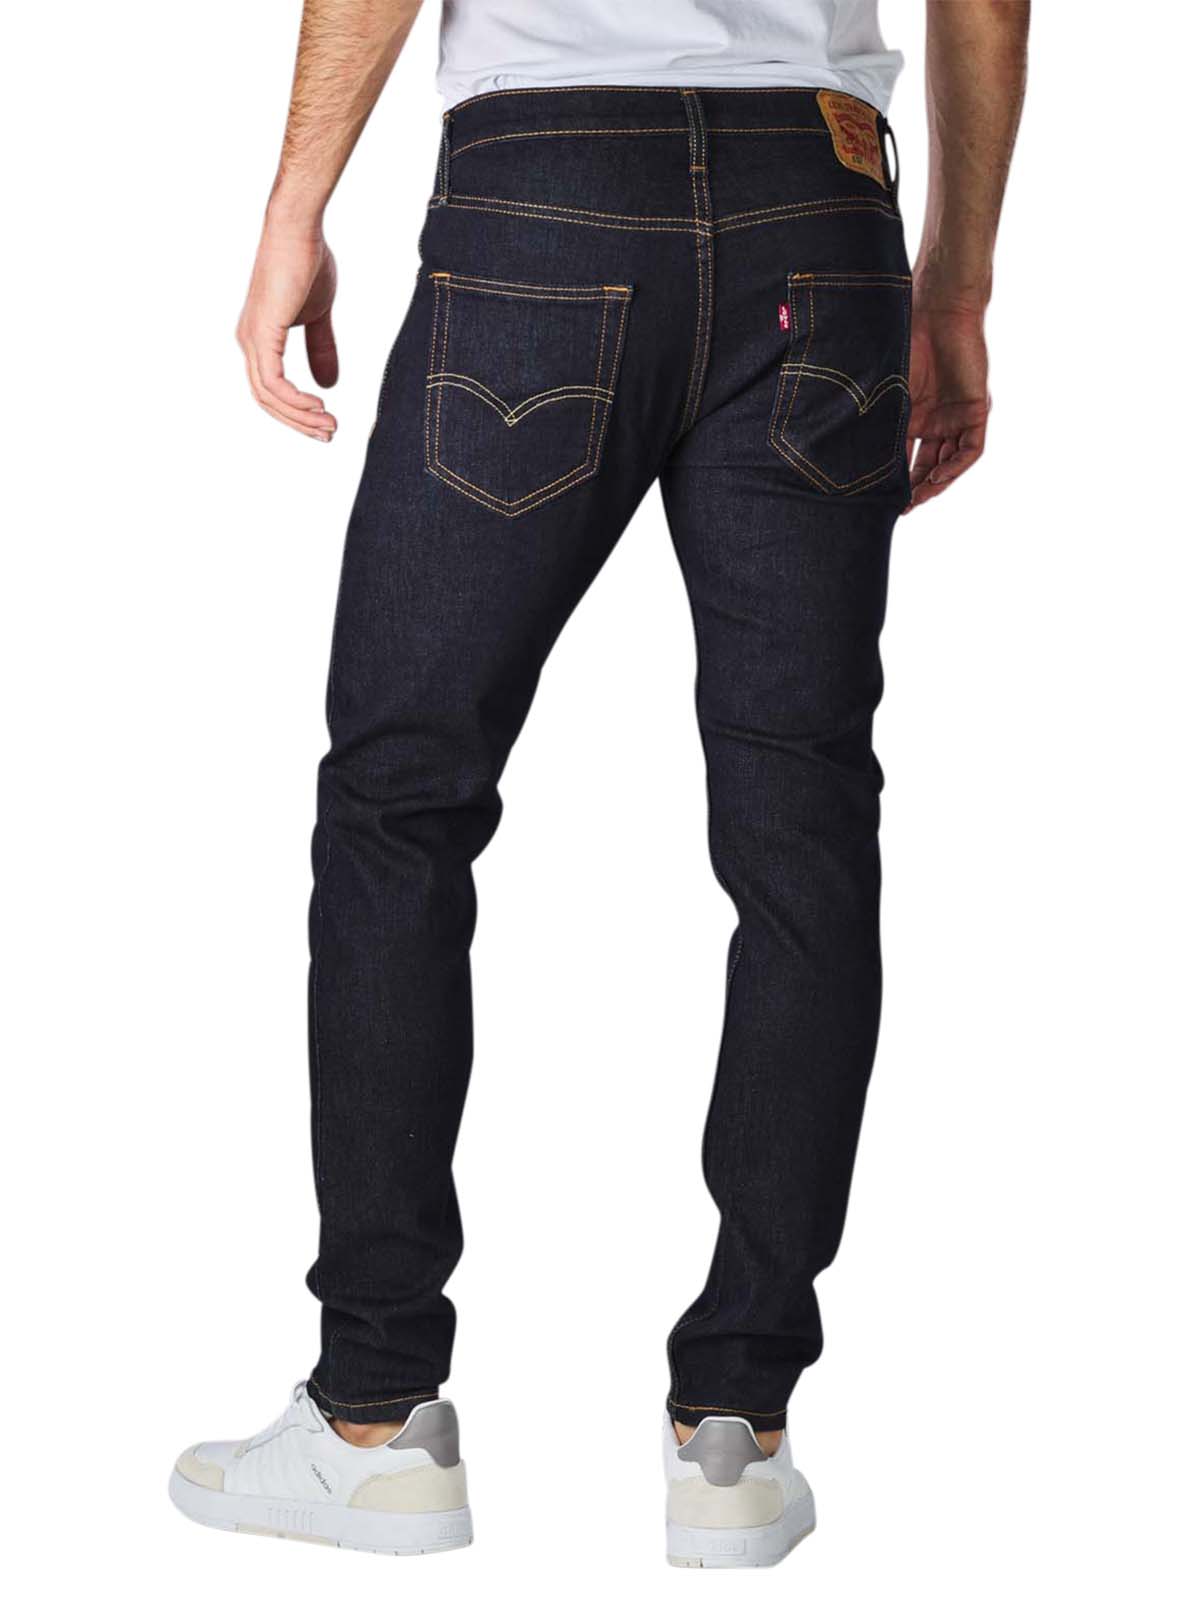 Levi's 512 Jeans Slim Tapered dark hollow Levi's Men's Jeans | Free  Shipping on  - SIMPLY LOOK GOOD